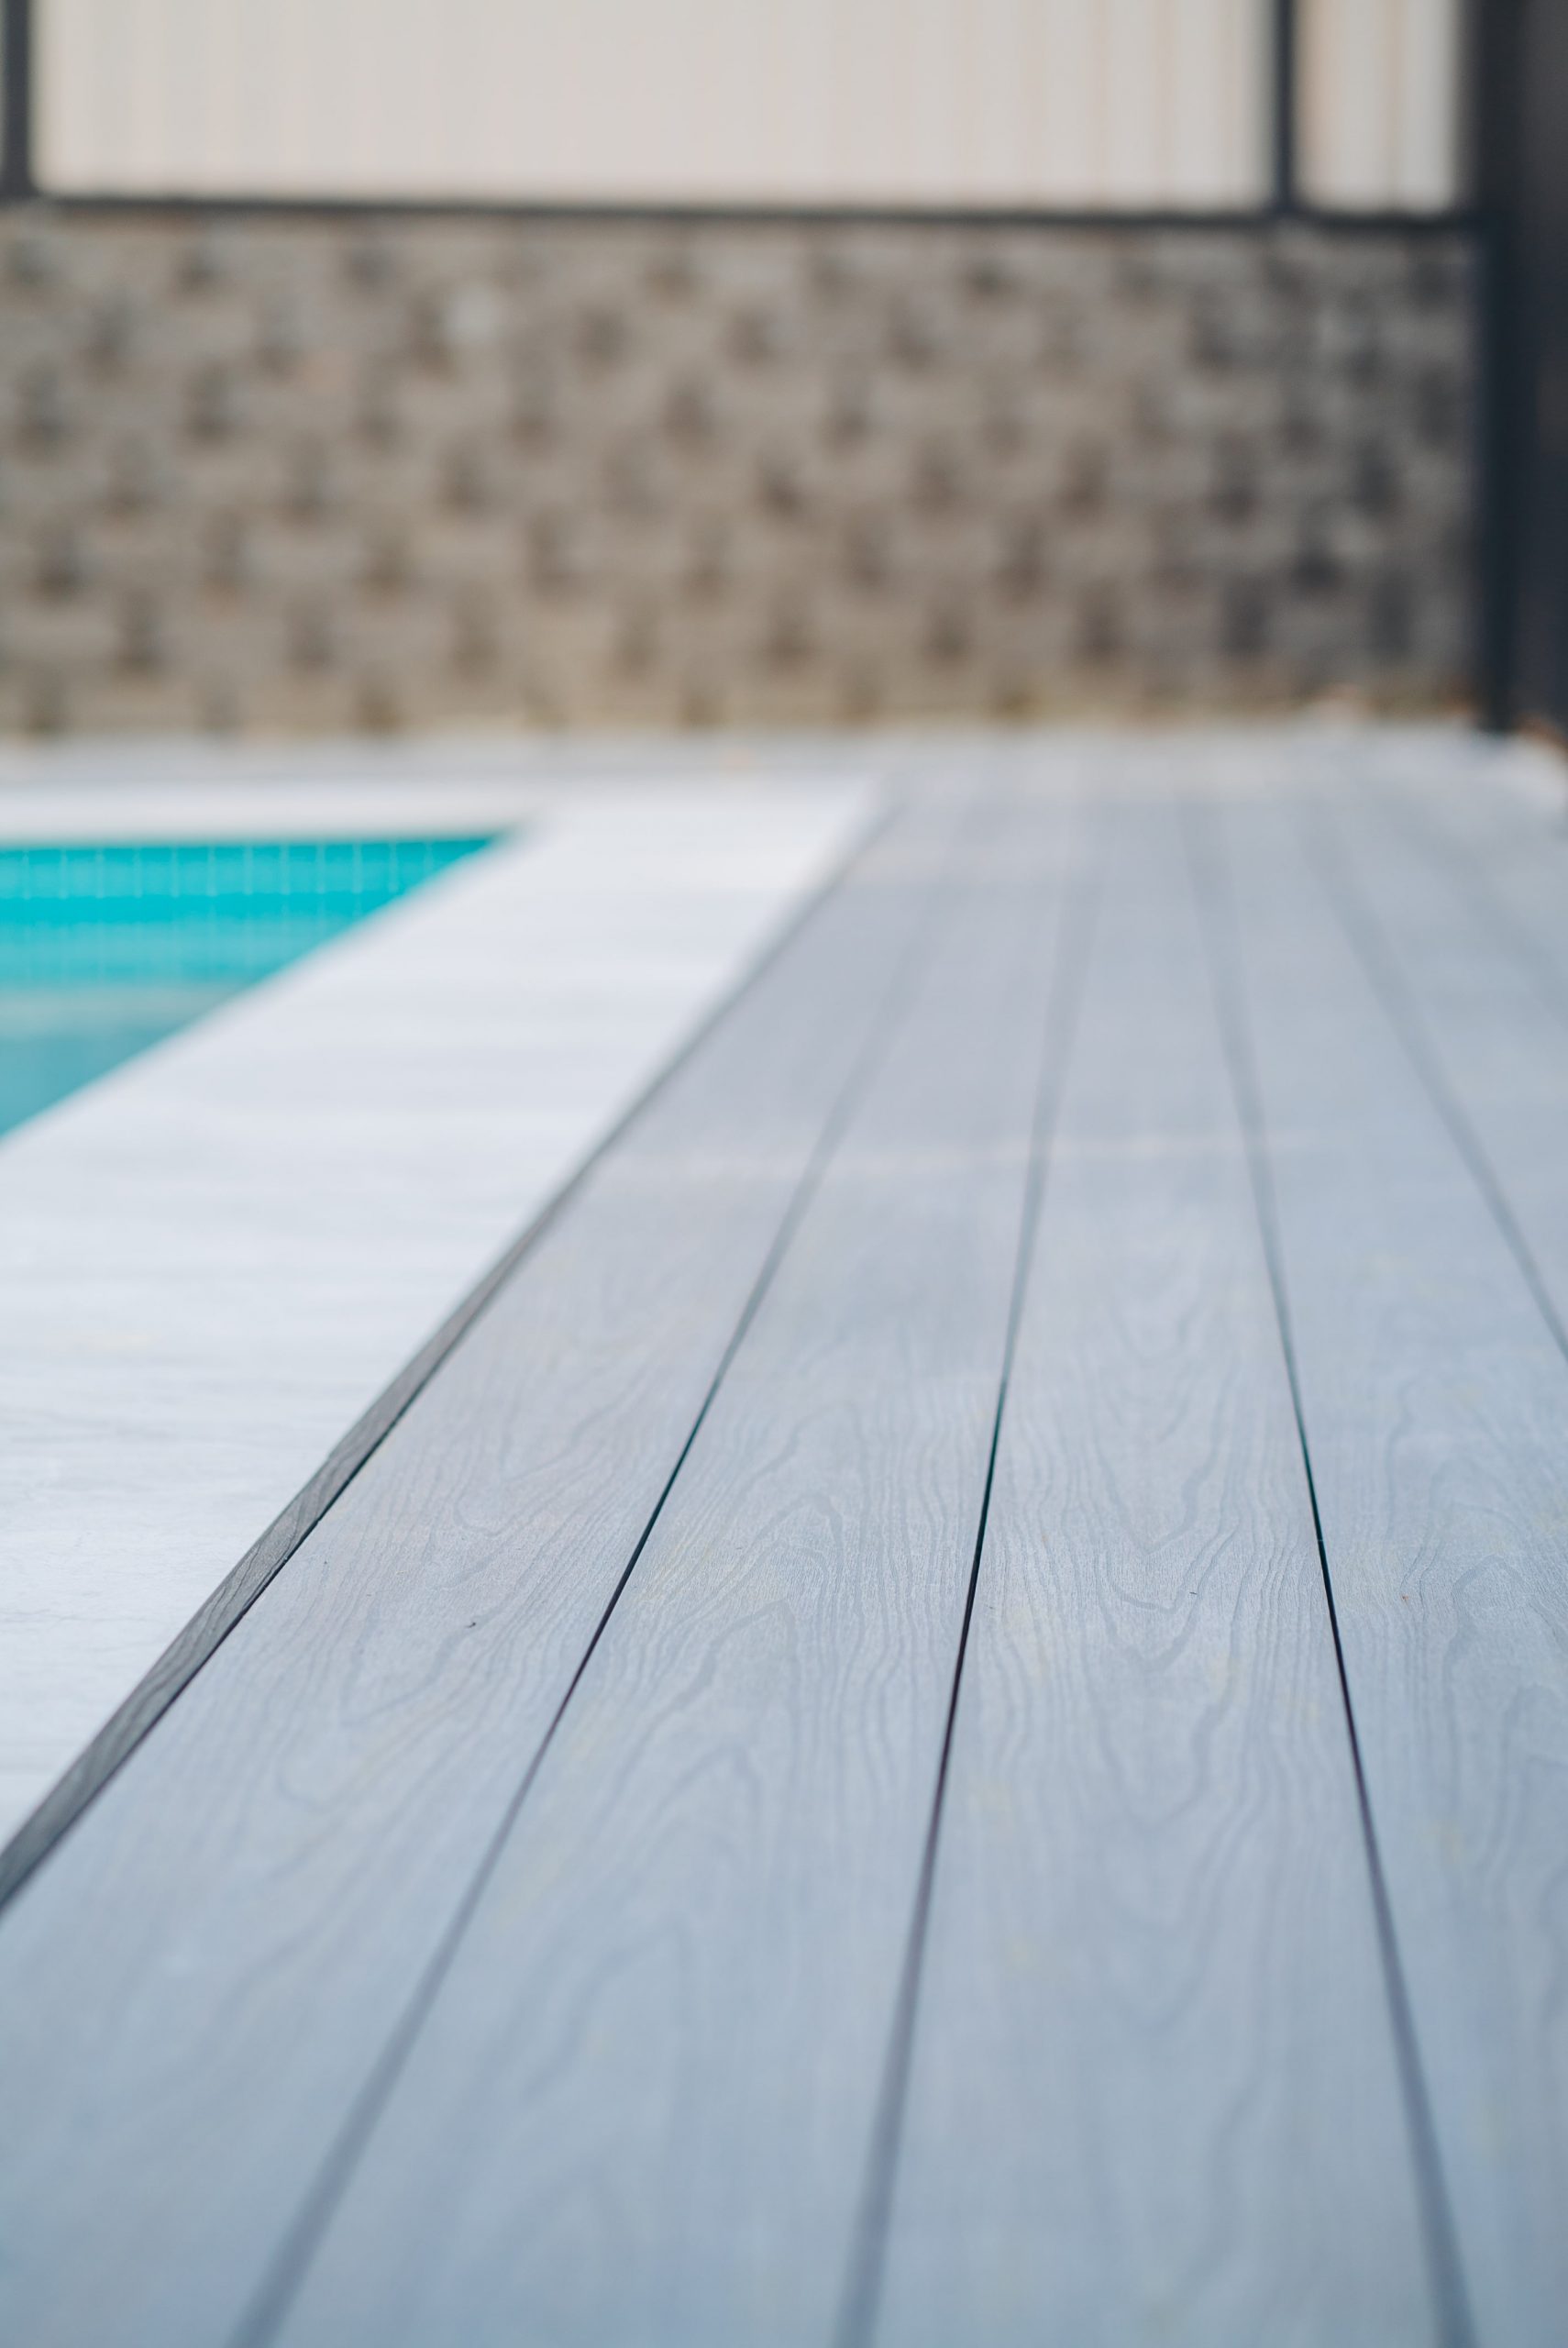 A detailed view of Mountain ash composite decking